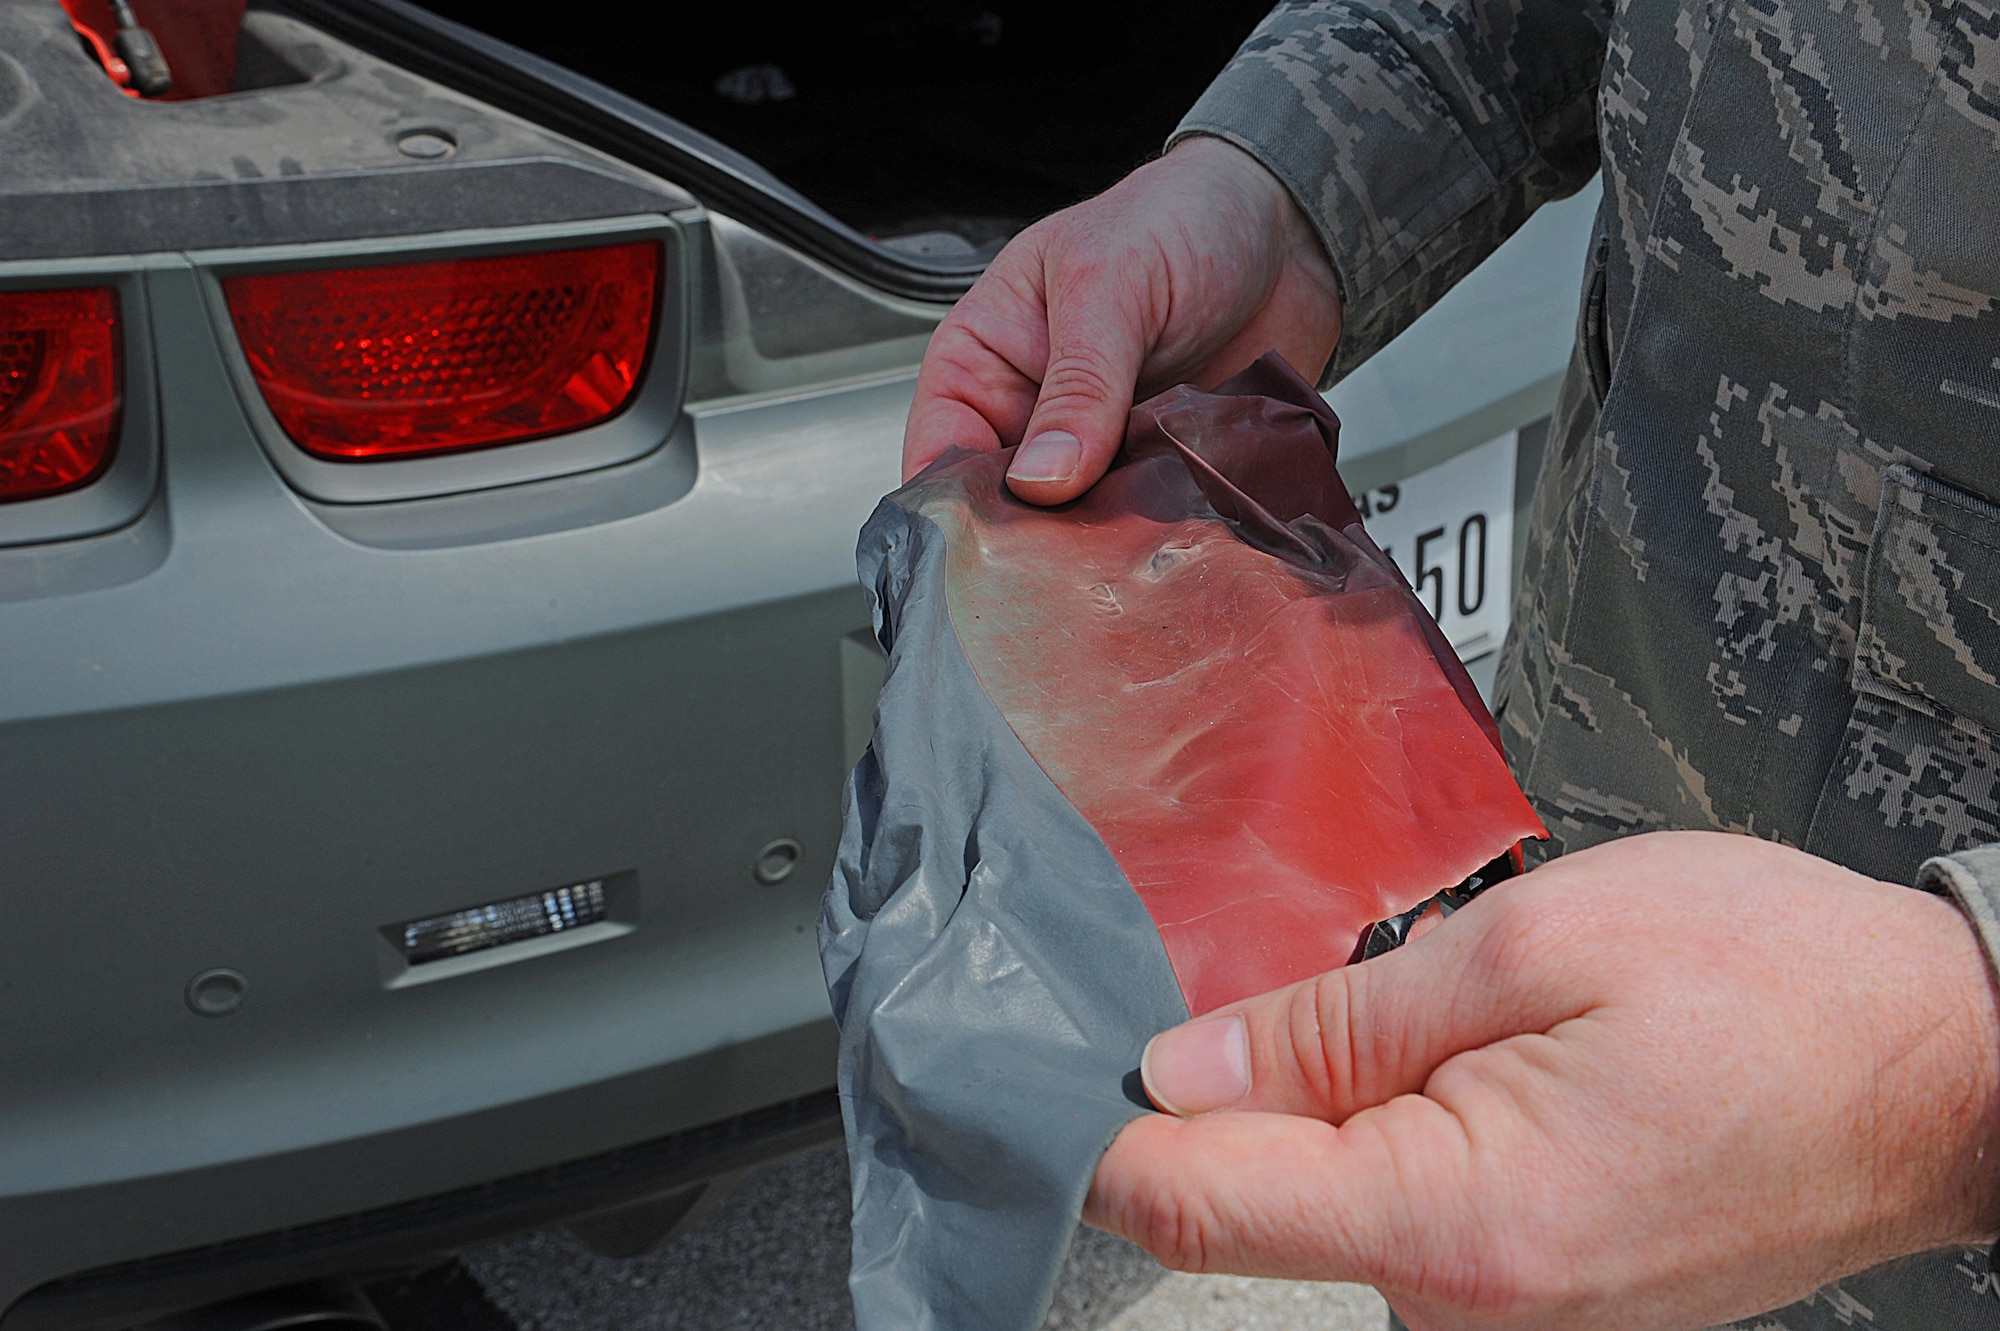 U.S. Air Force Tech. Sgt. Stephen Strong, 315th Training Squadron instructor, displays what the paint on his car looks like after being peeled off at Goodfellow Air Force Base, Aug. 18, 2015. Strong designs his own car by spraying on a type of paint that can peel off if he wishes to start over again. (U.S. Air Force photo by Airman Caelynn Ferguson/Released)